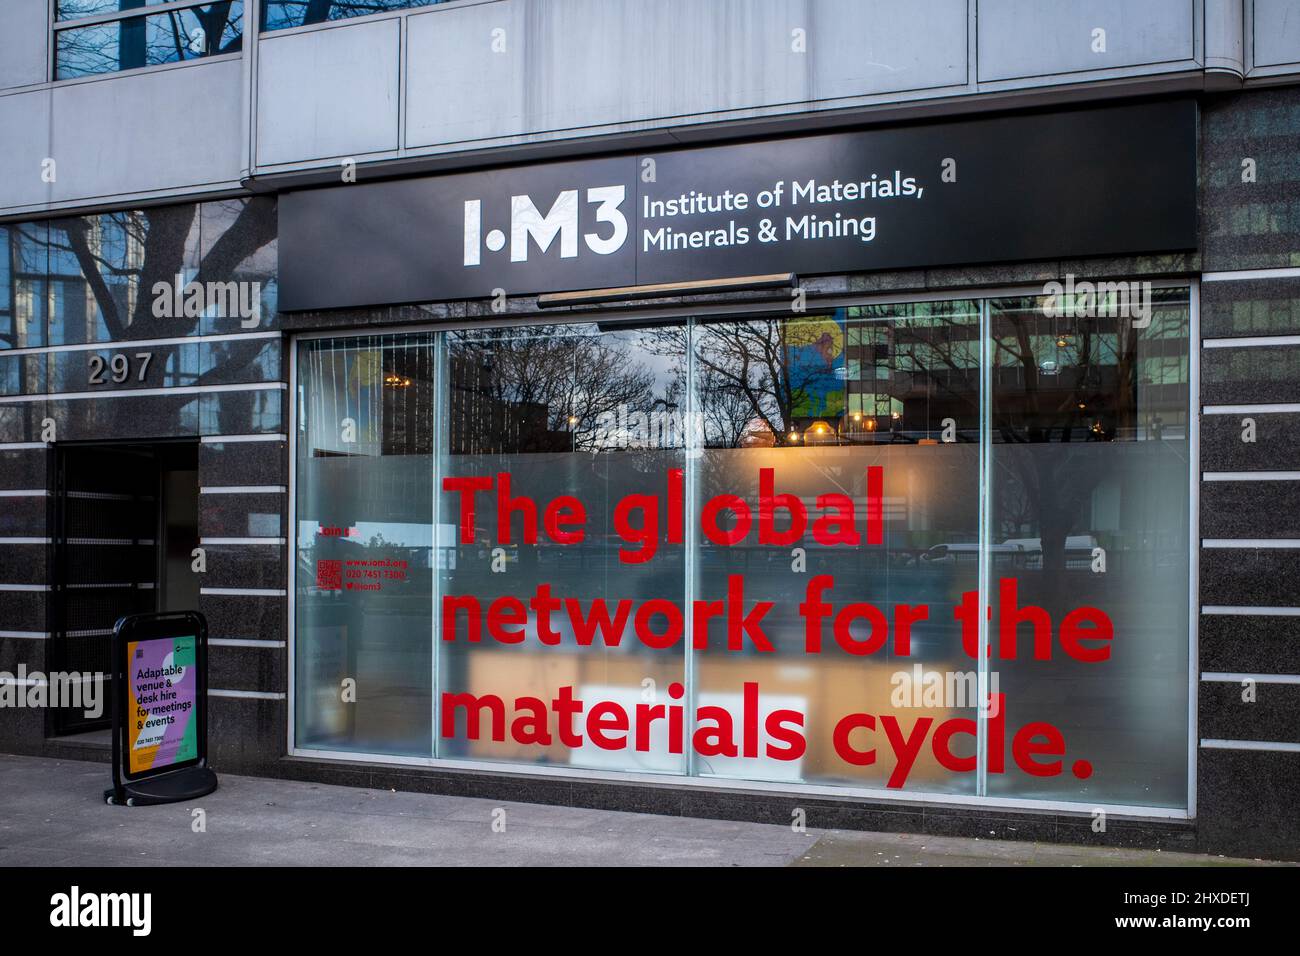 IOM3 - The Institute of Materials Minerals and Mining London. Die IOM3 Zentrale in 297 Euston Road London UK. Stockfoto